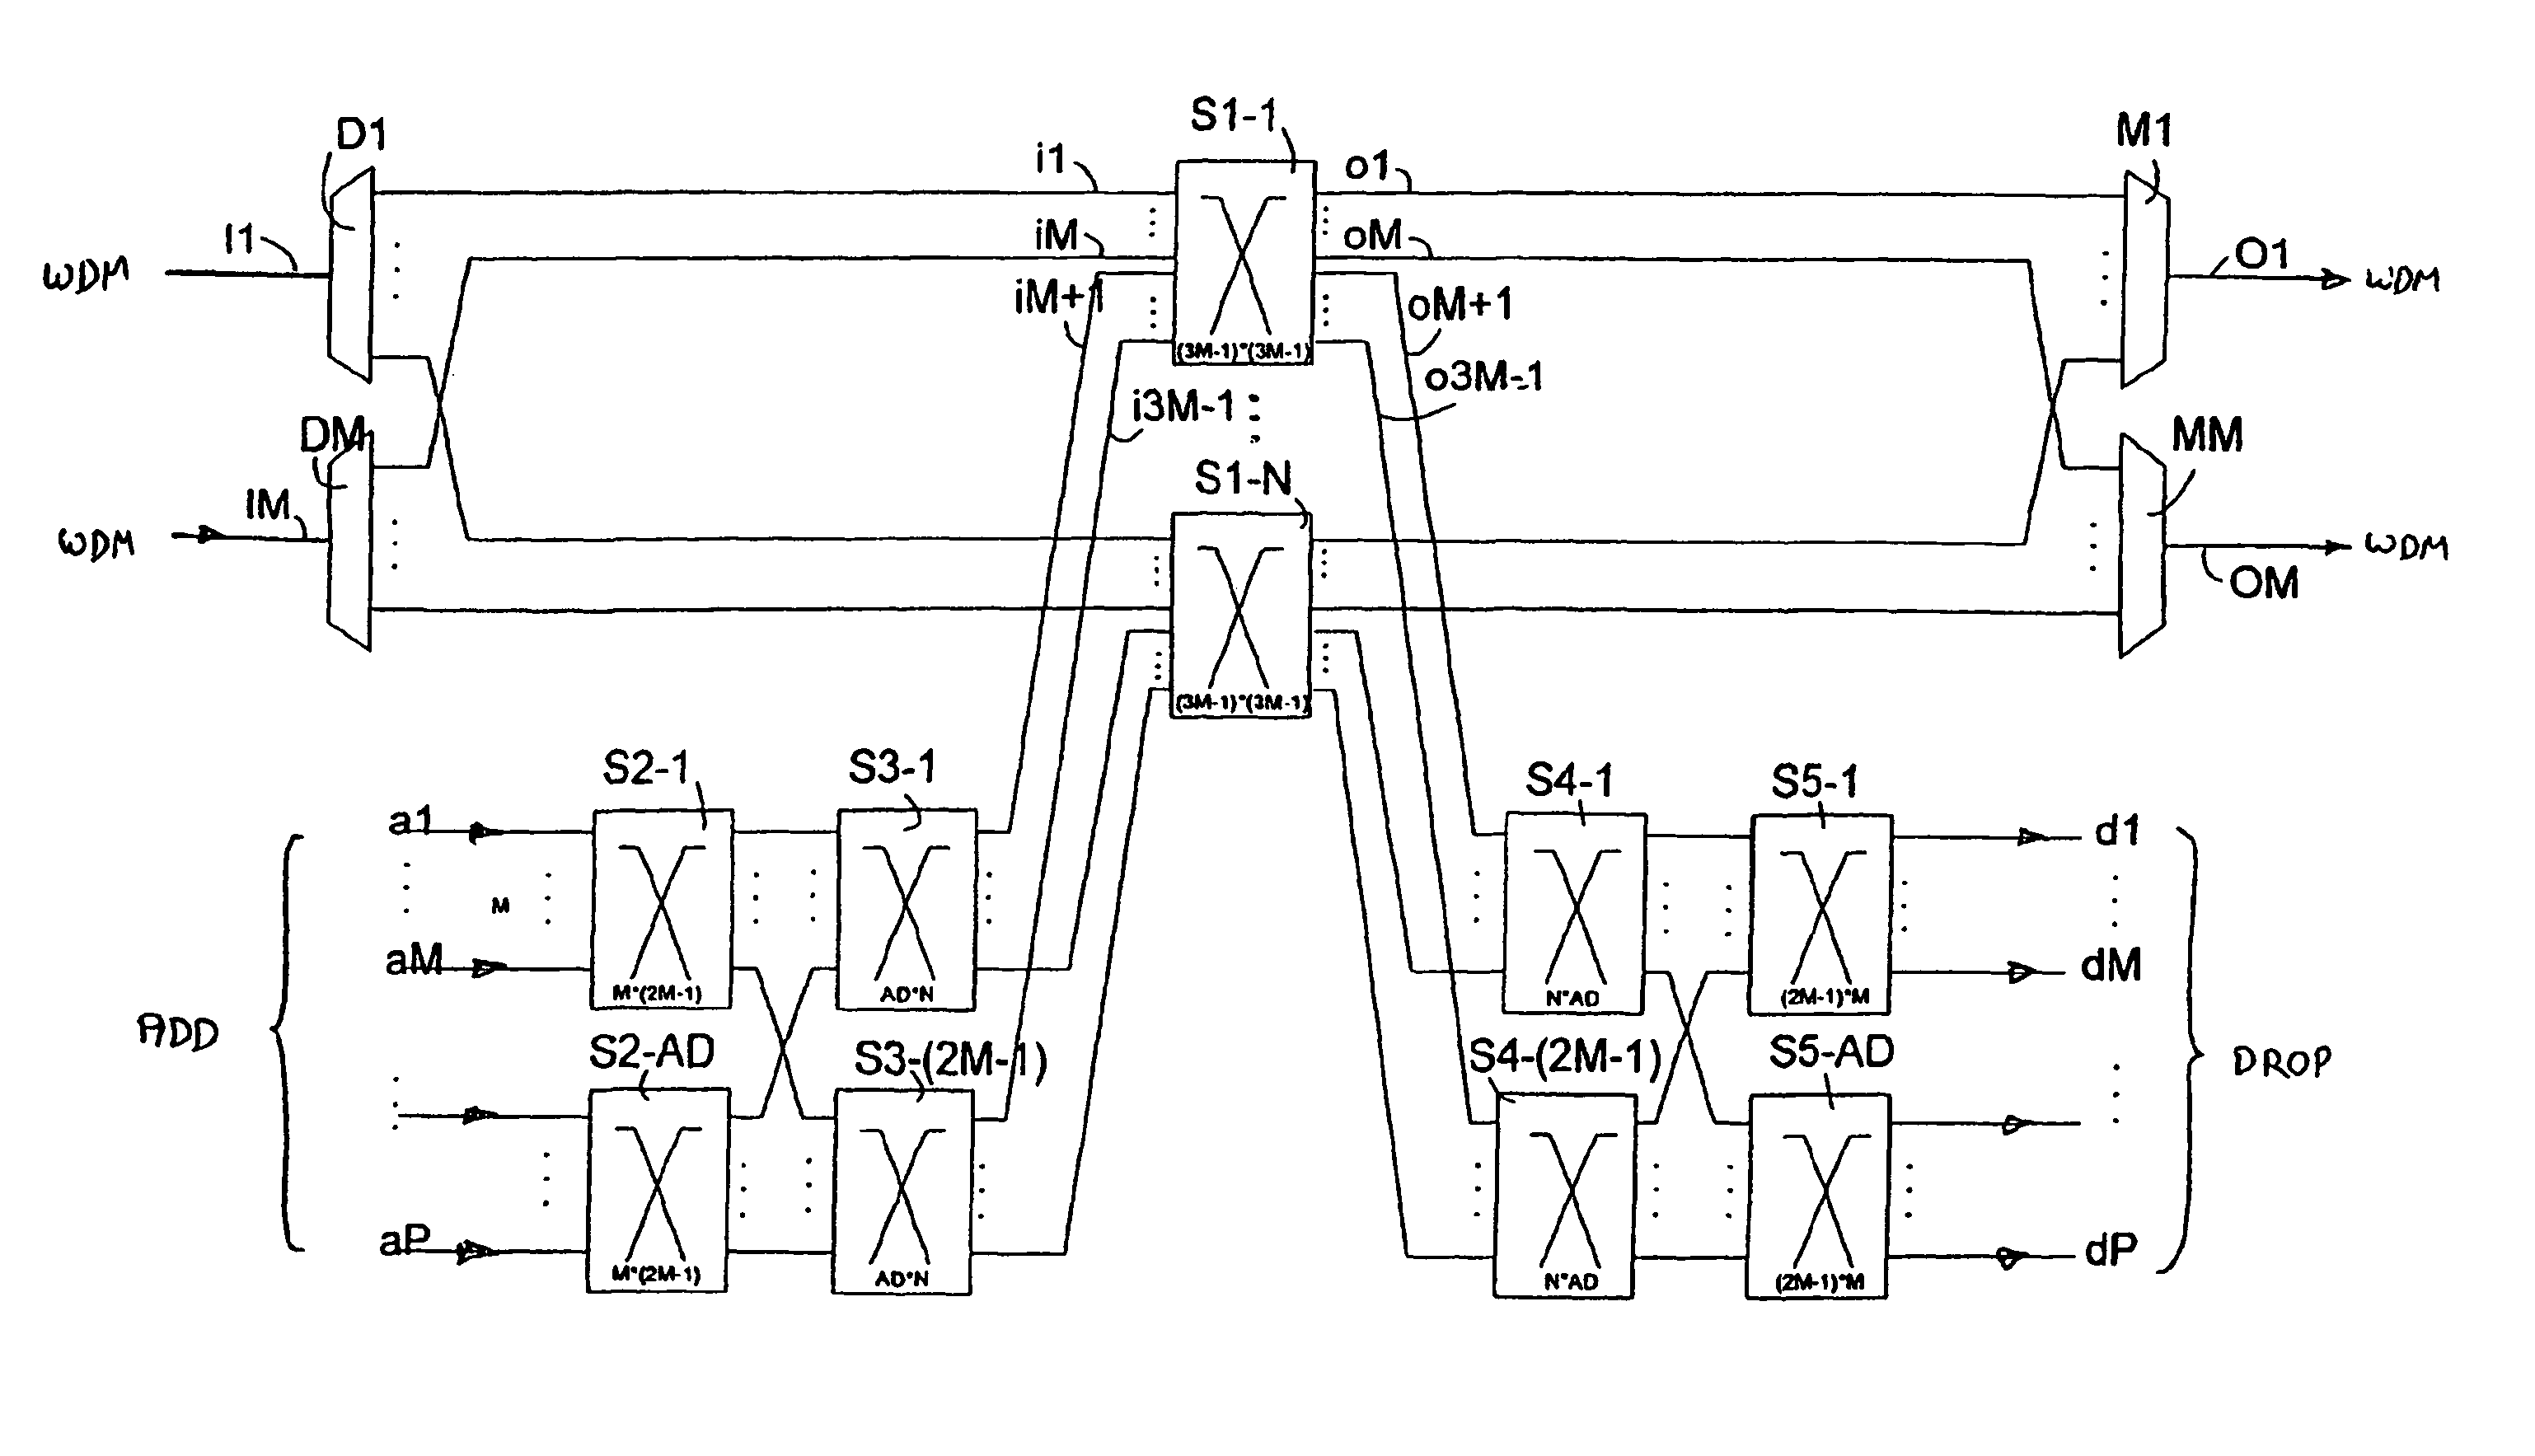 Optical cross-connector containing multi-stage Clos network in which a single-stage matrix comprises one stage of the Clos network